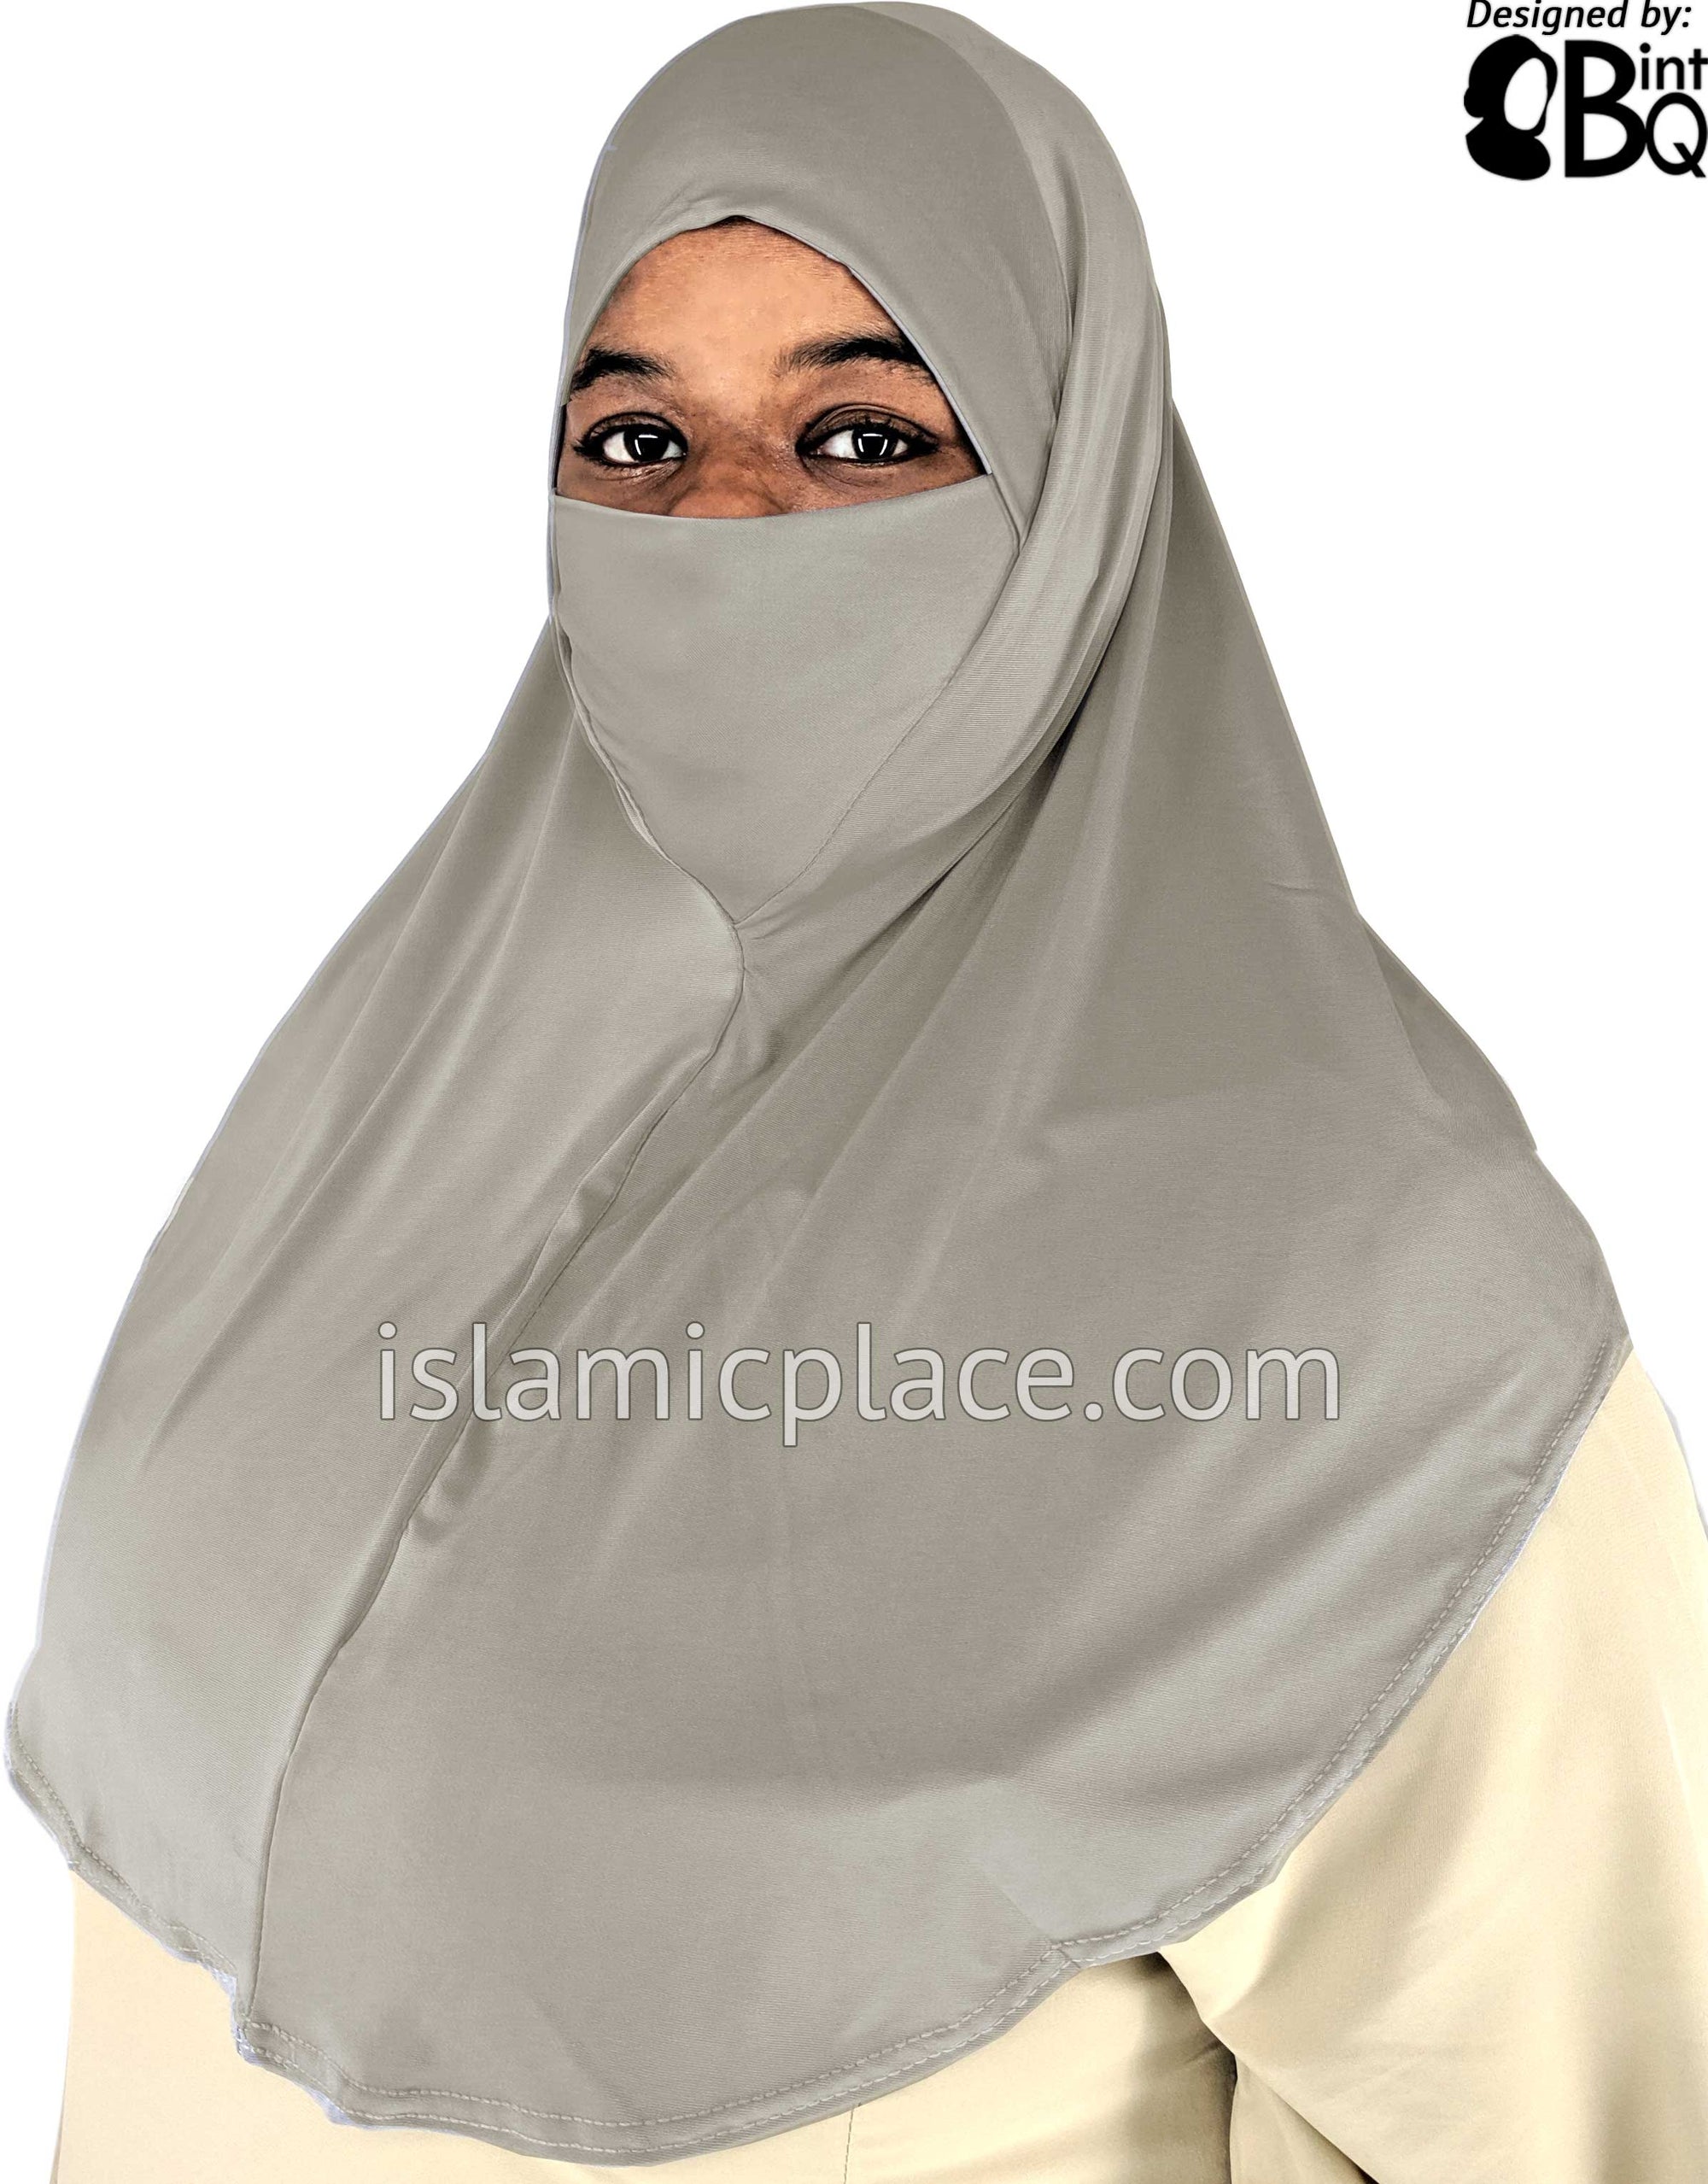 Slate Gray - Plain Teen to Adult (Large) Hijab Al-Amira with Built-in Niqab